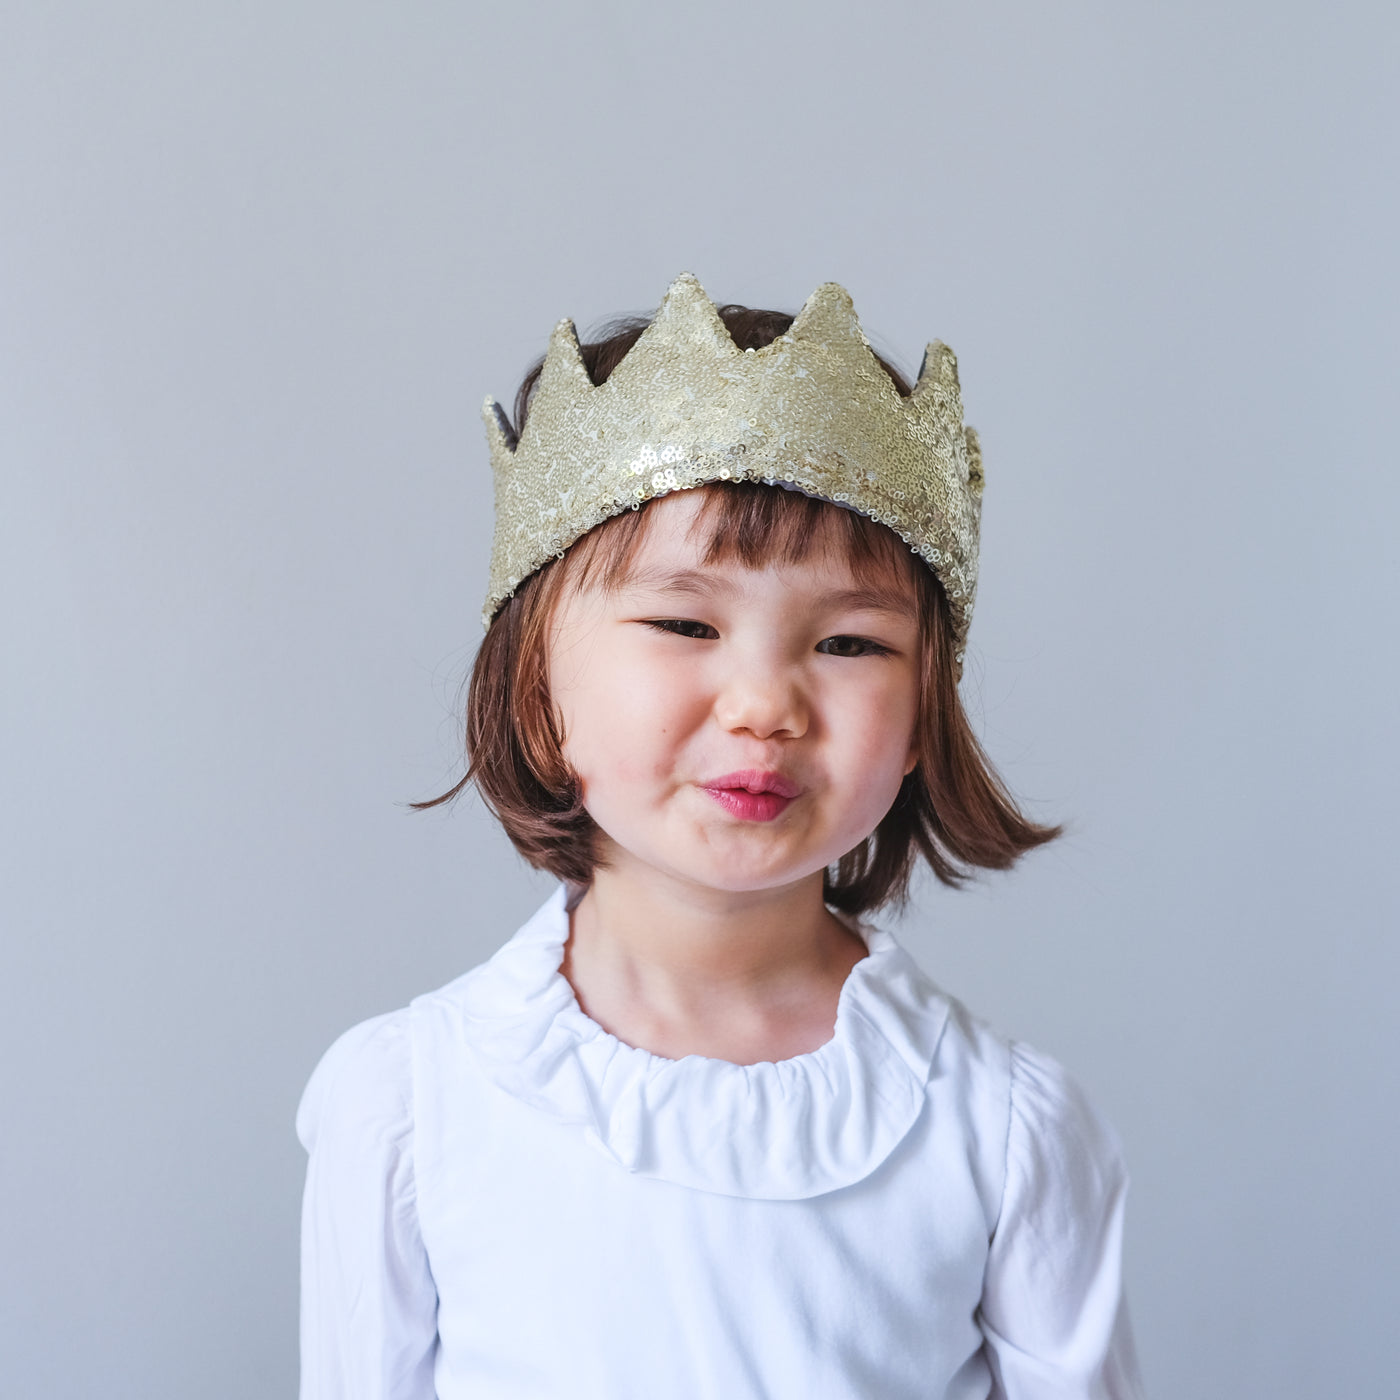 Little dark haired girl with a cheeky smile wearing a sequin gold fabric crown